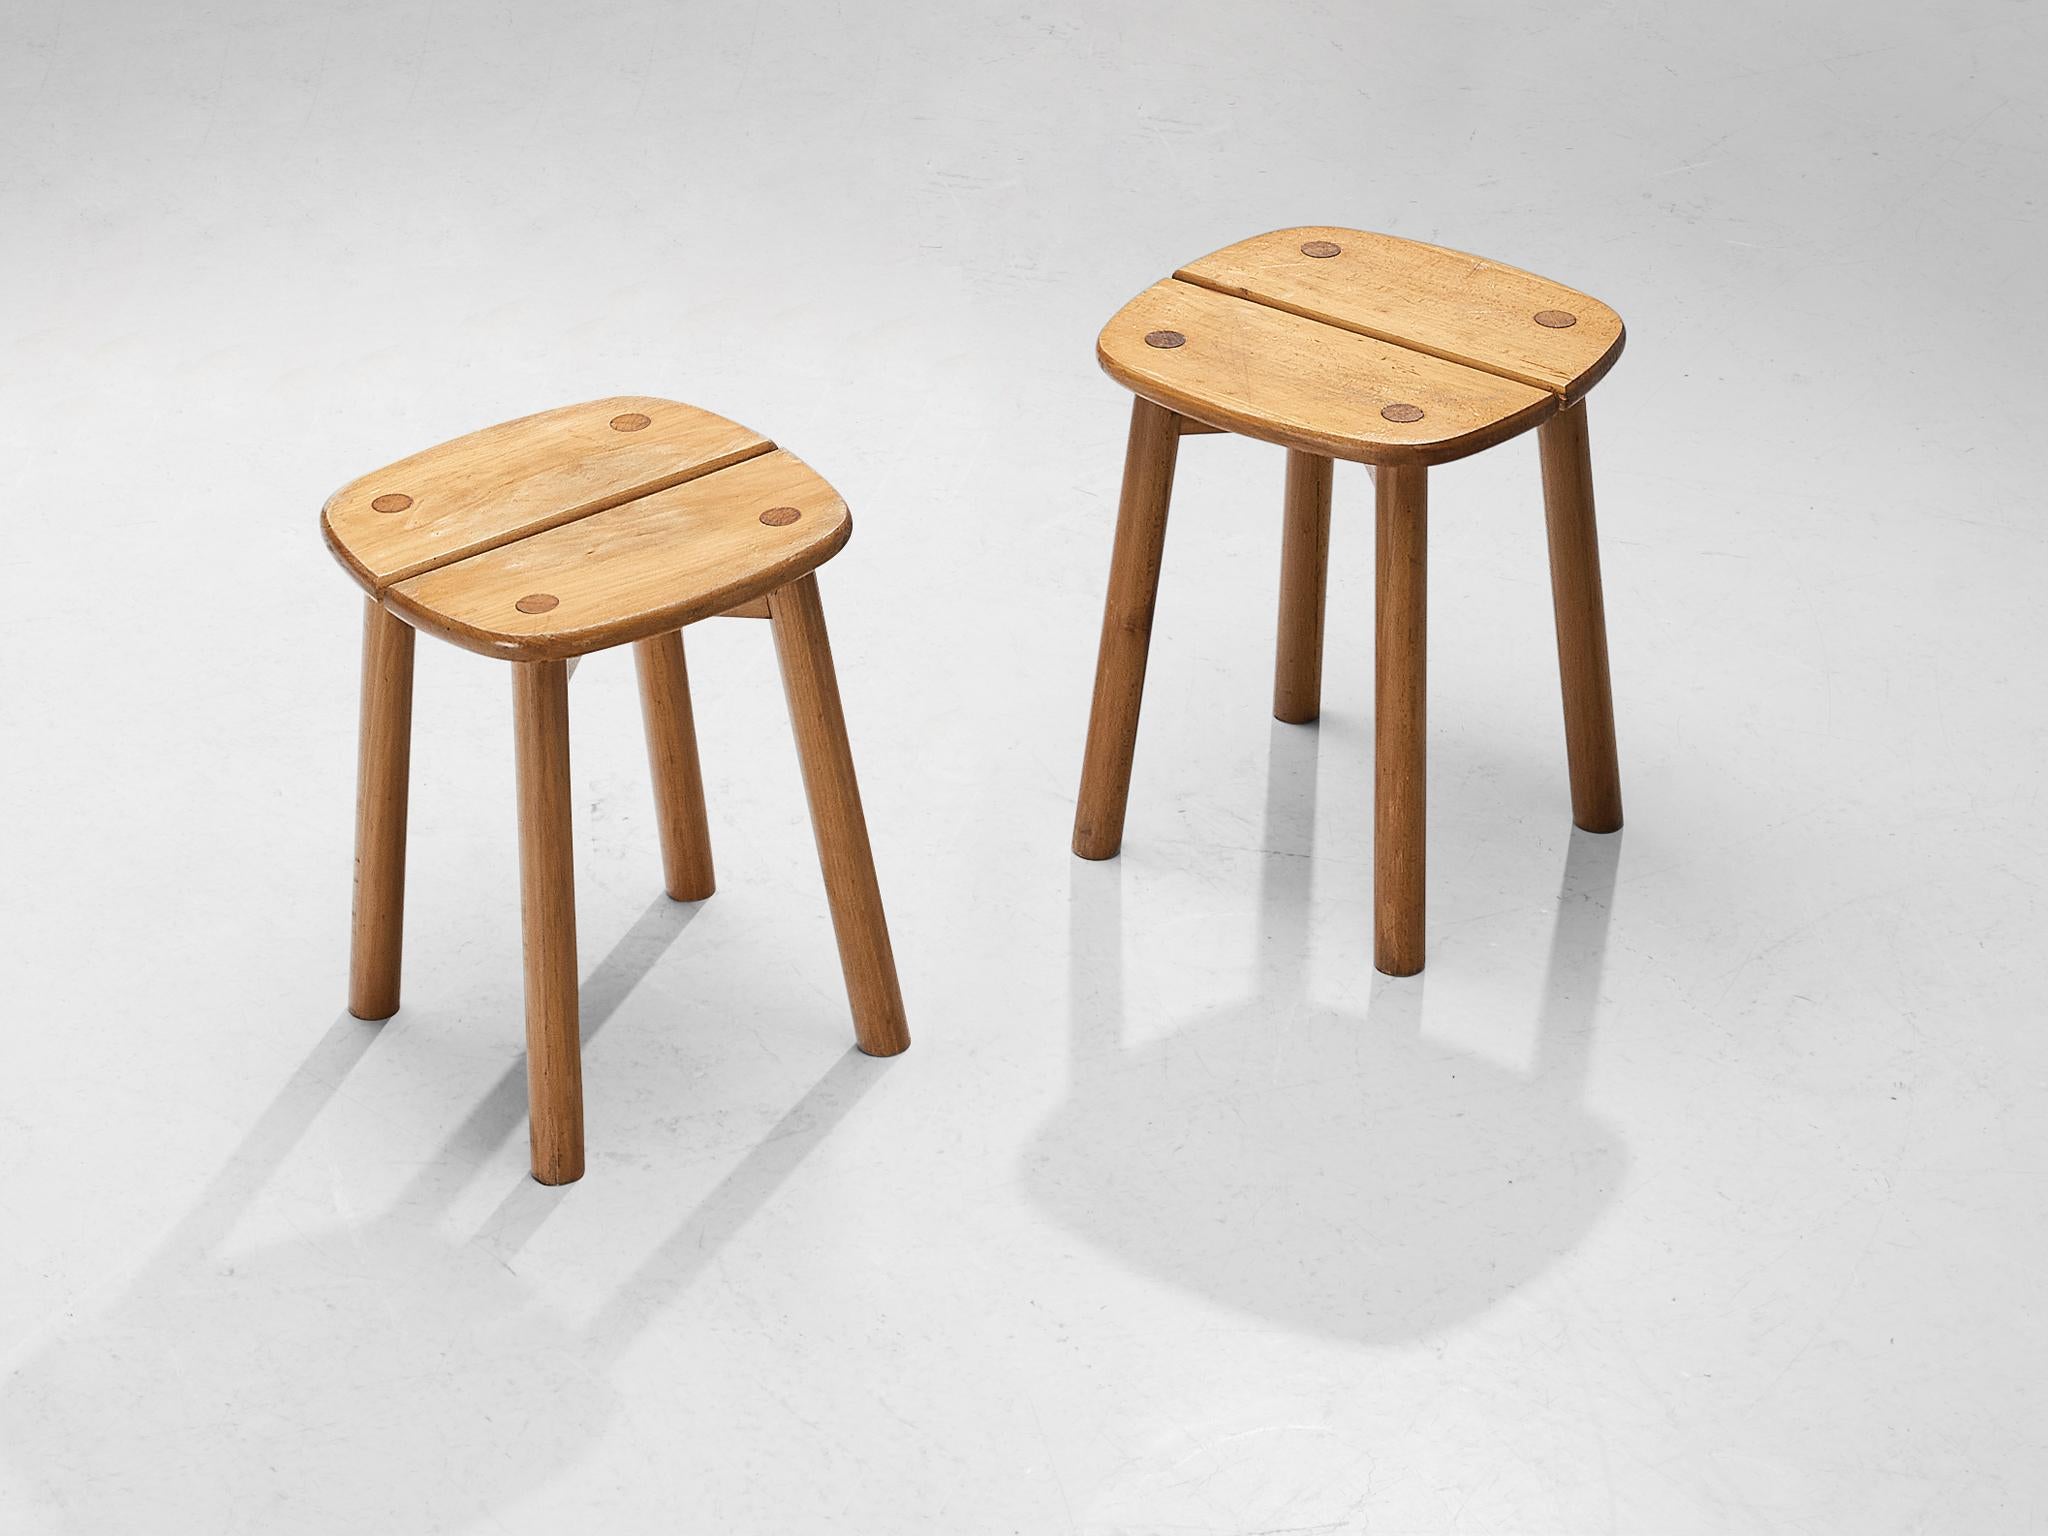 Pierre Gautier-Delaye, pair of stools, beech, France, 1960s

This subtle and modest stool is executed in stained beechwood. The seating area is divided into two organically shaped slats and is detailed with wood-joints of the four cylindrical legs.